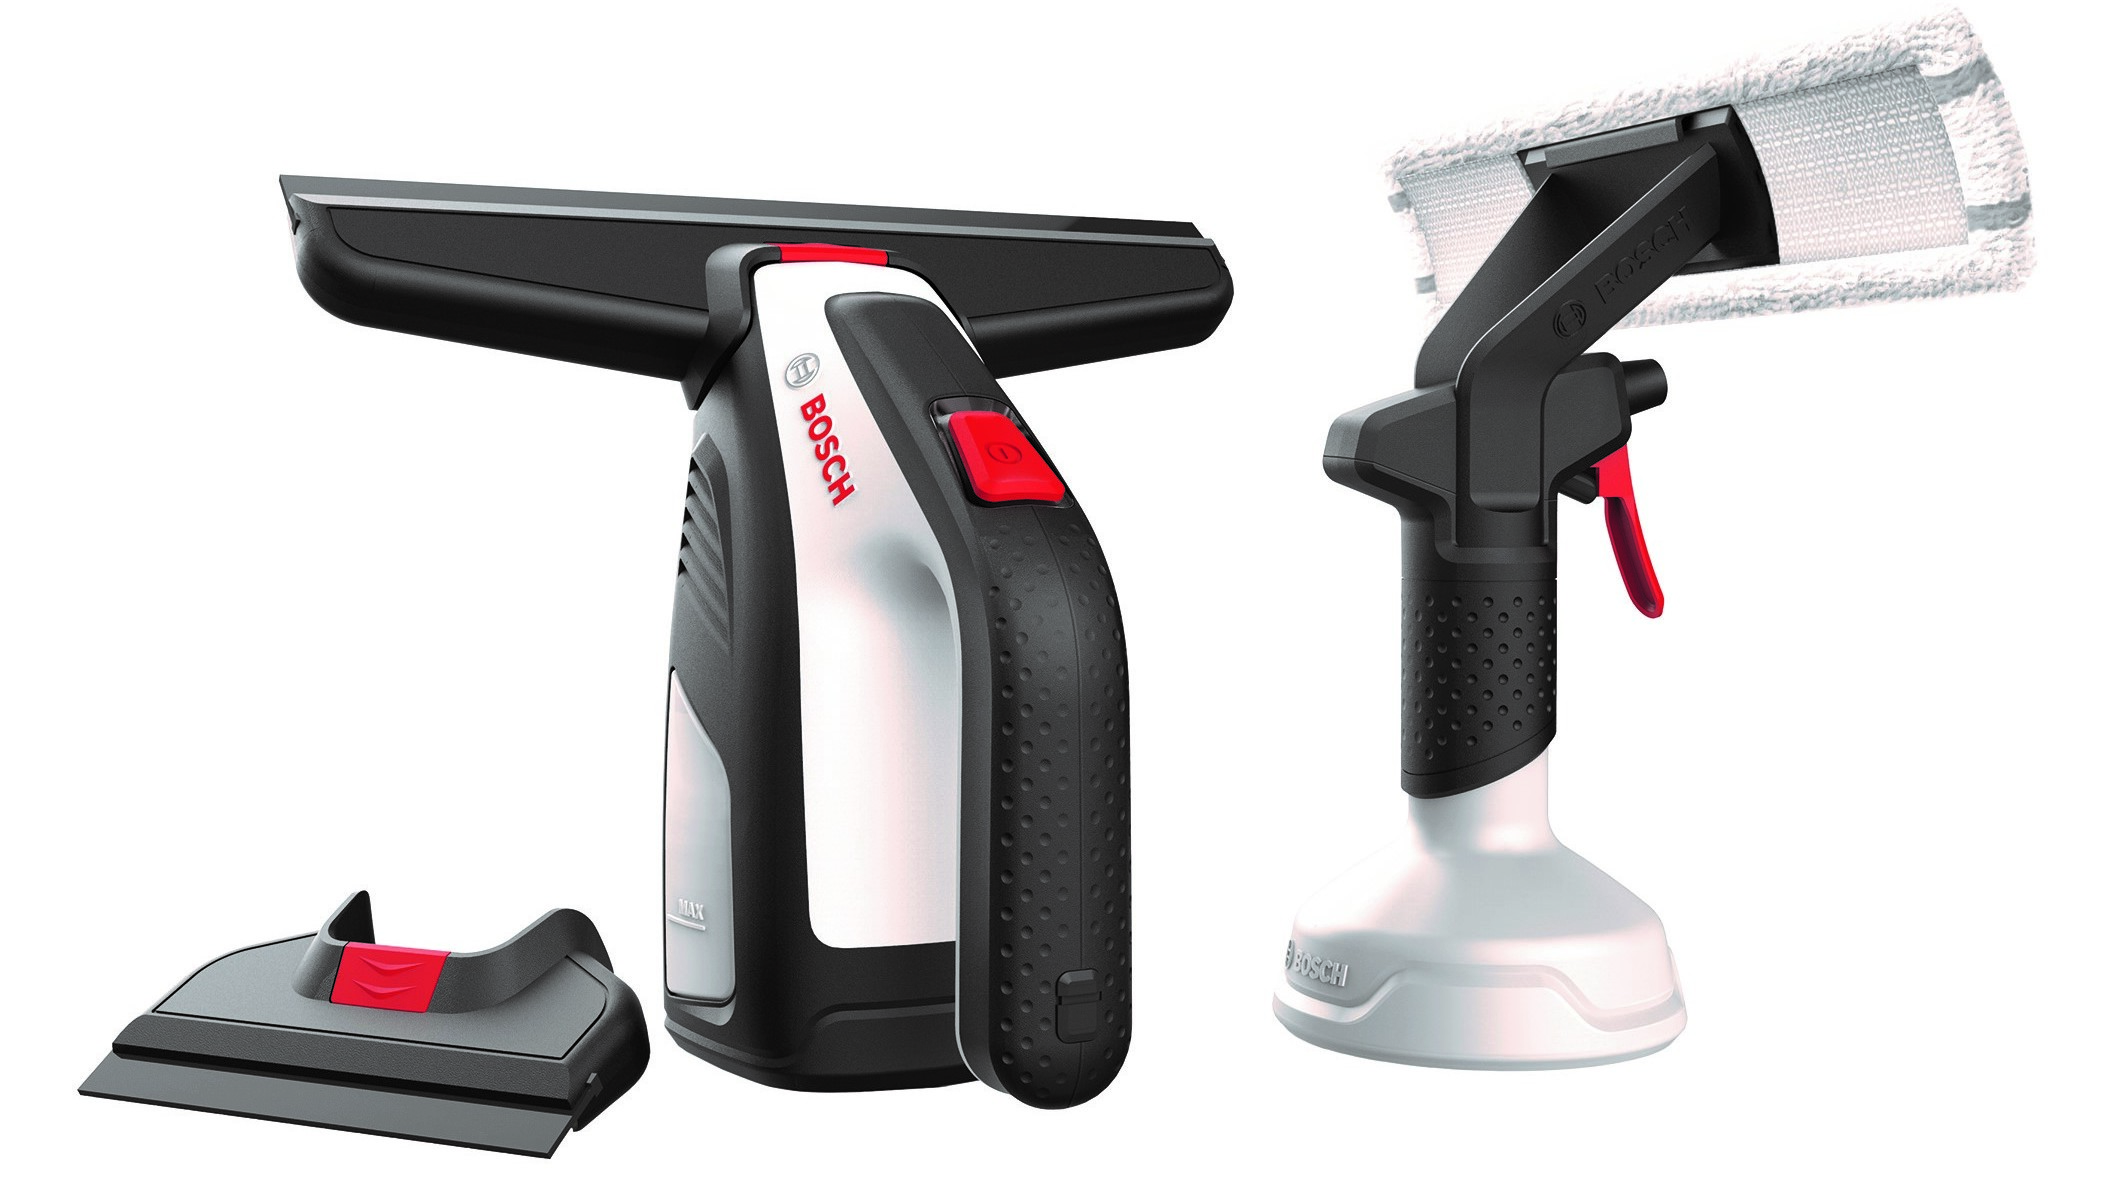 Say goodbye to buckets and newspaper: GlassVac – first cordless window vacuum from Bosch